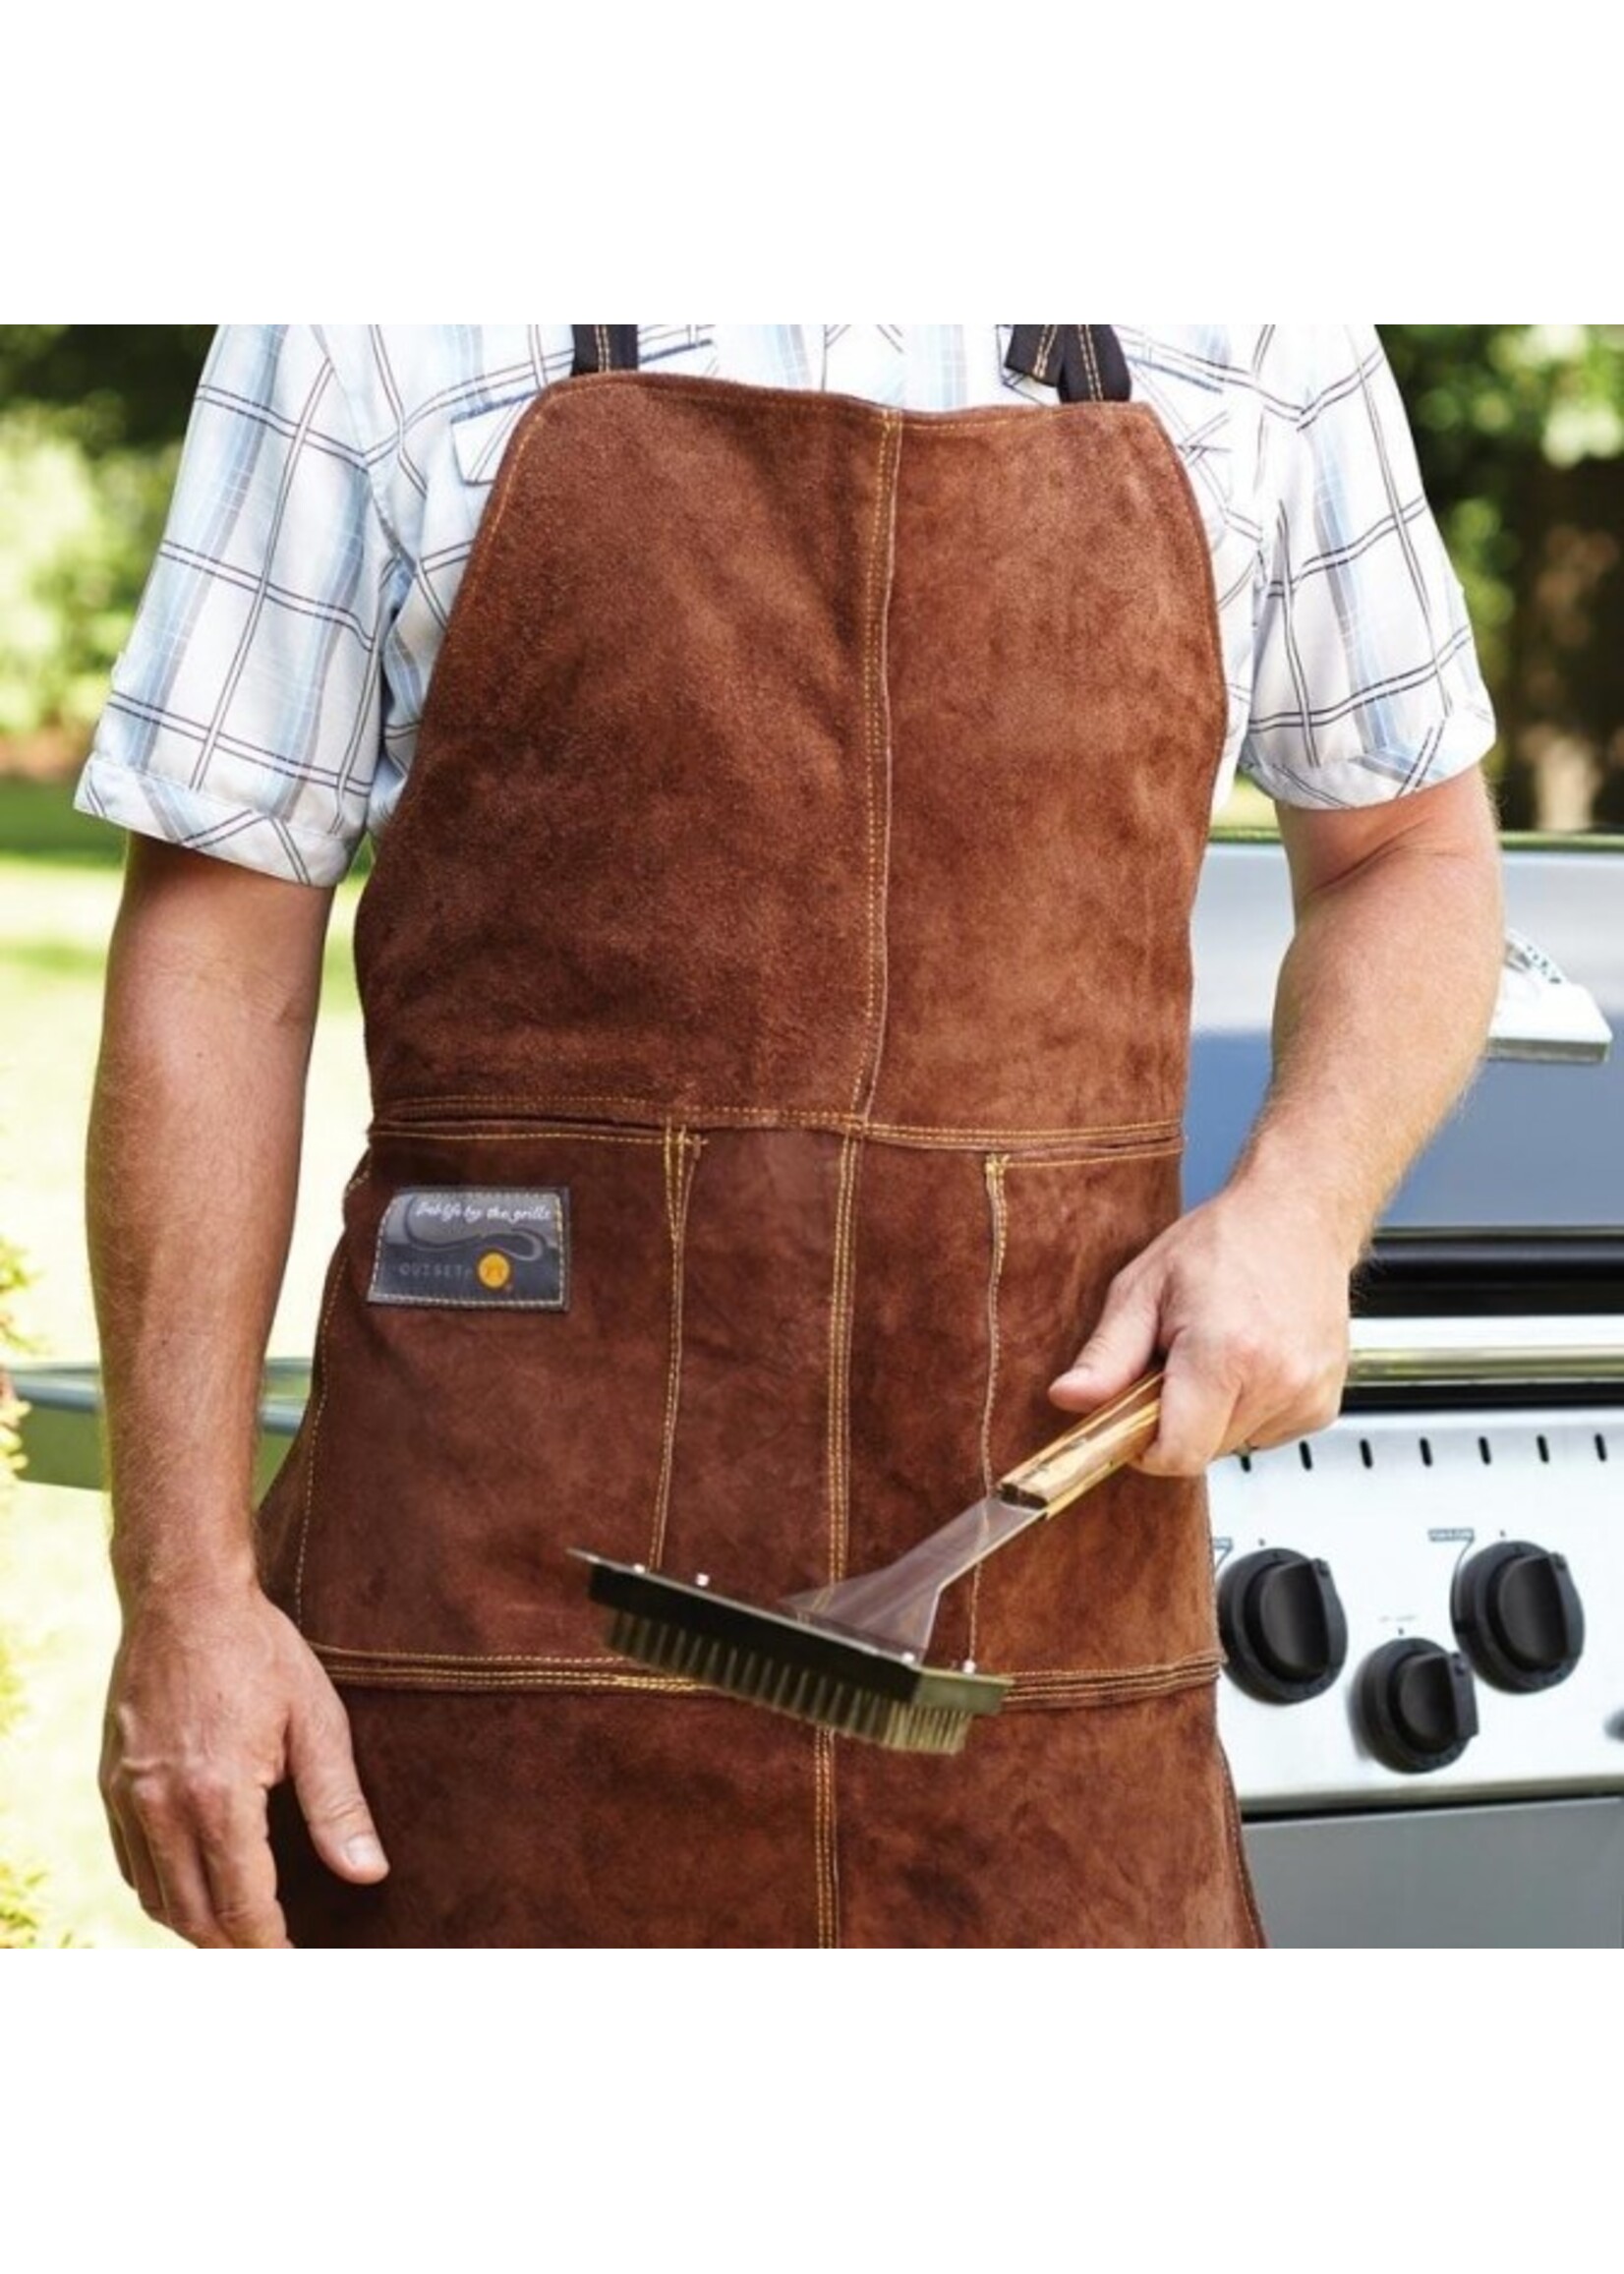 Outset Outset Leather Grill Apron